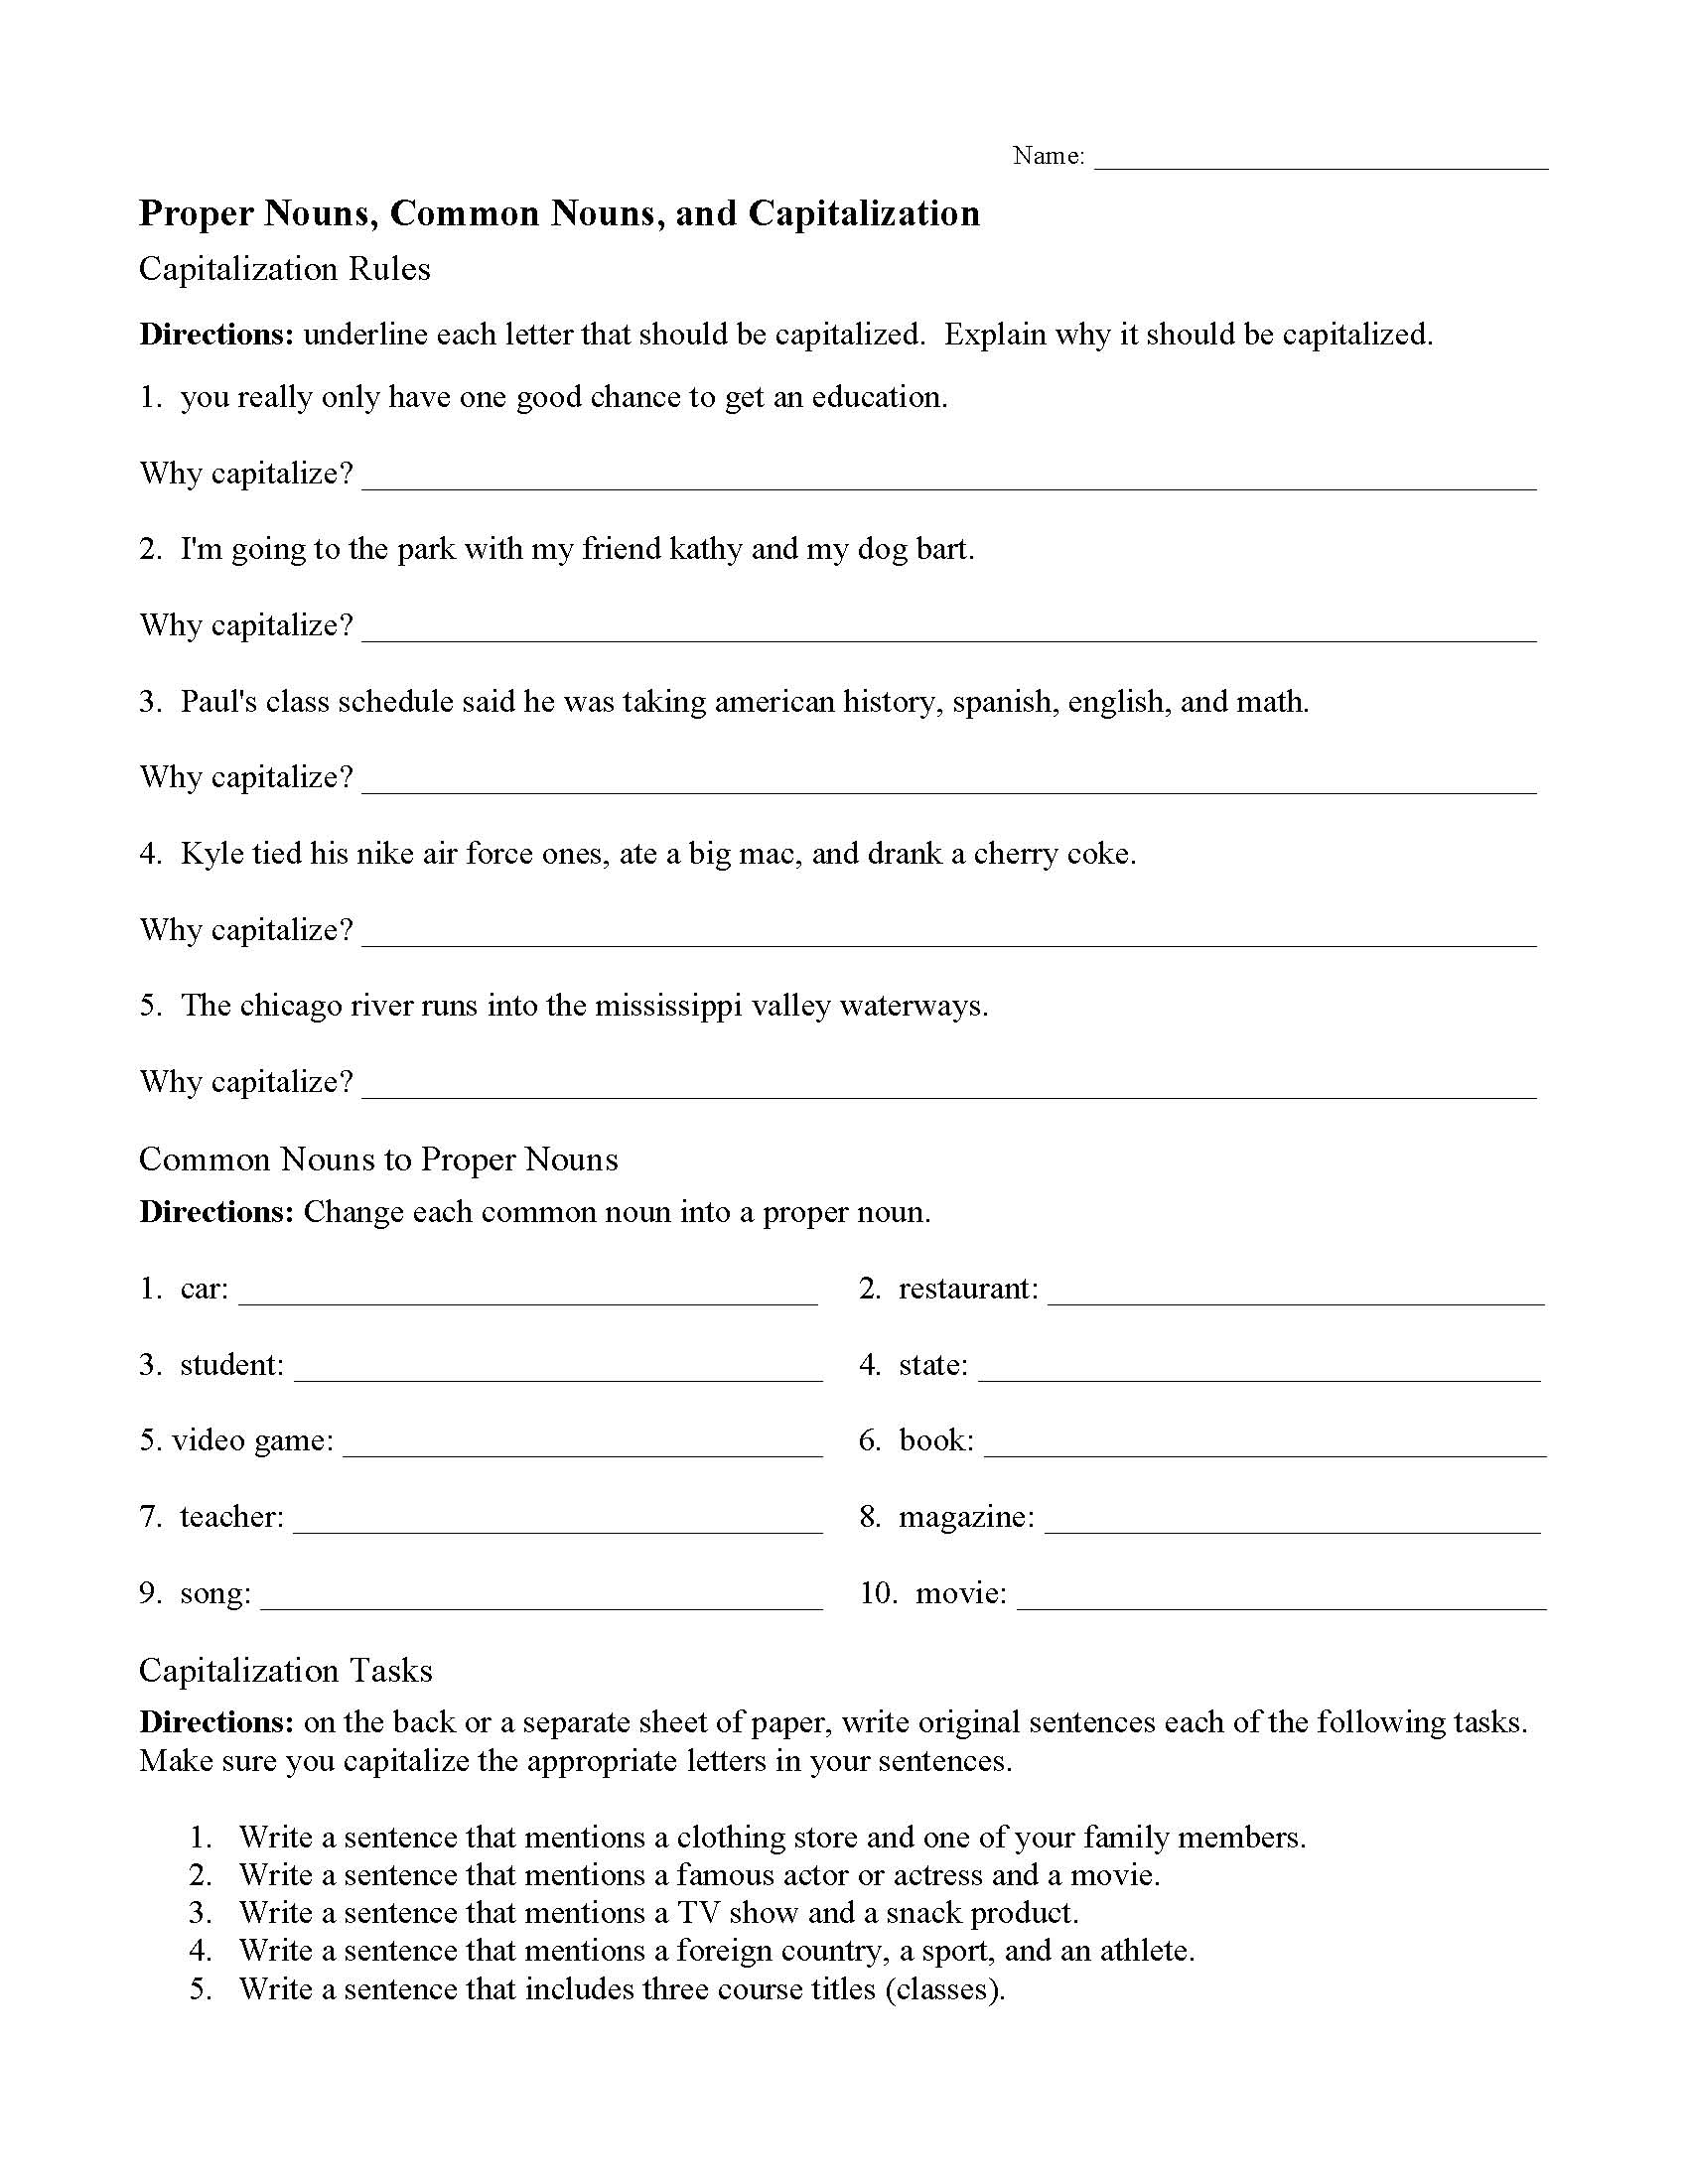 capitalizing-proper-nouns-worksheet-printable-word-searches